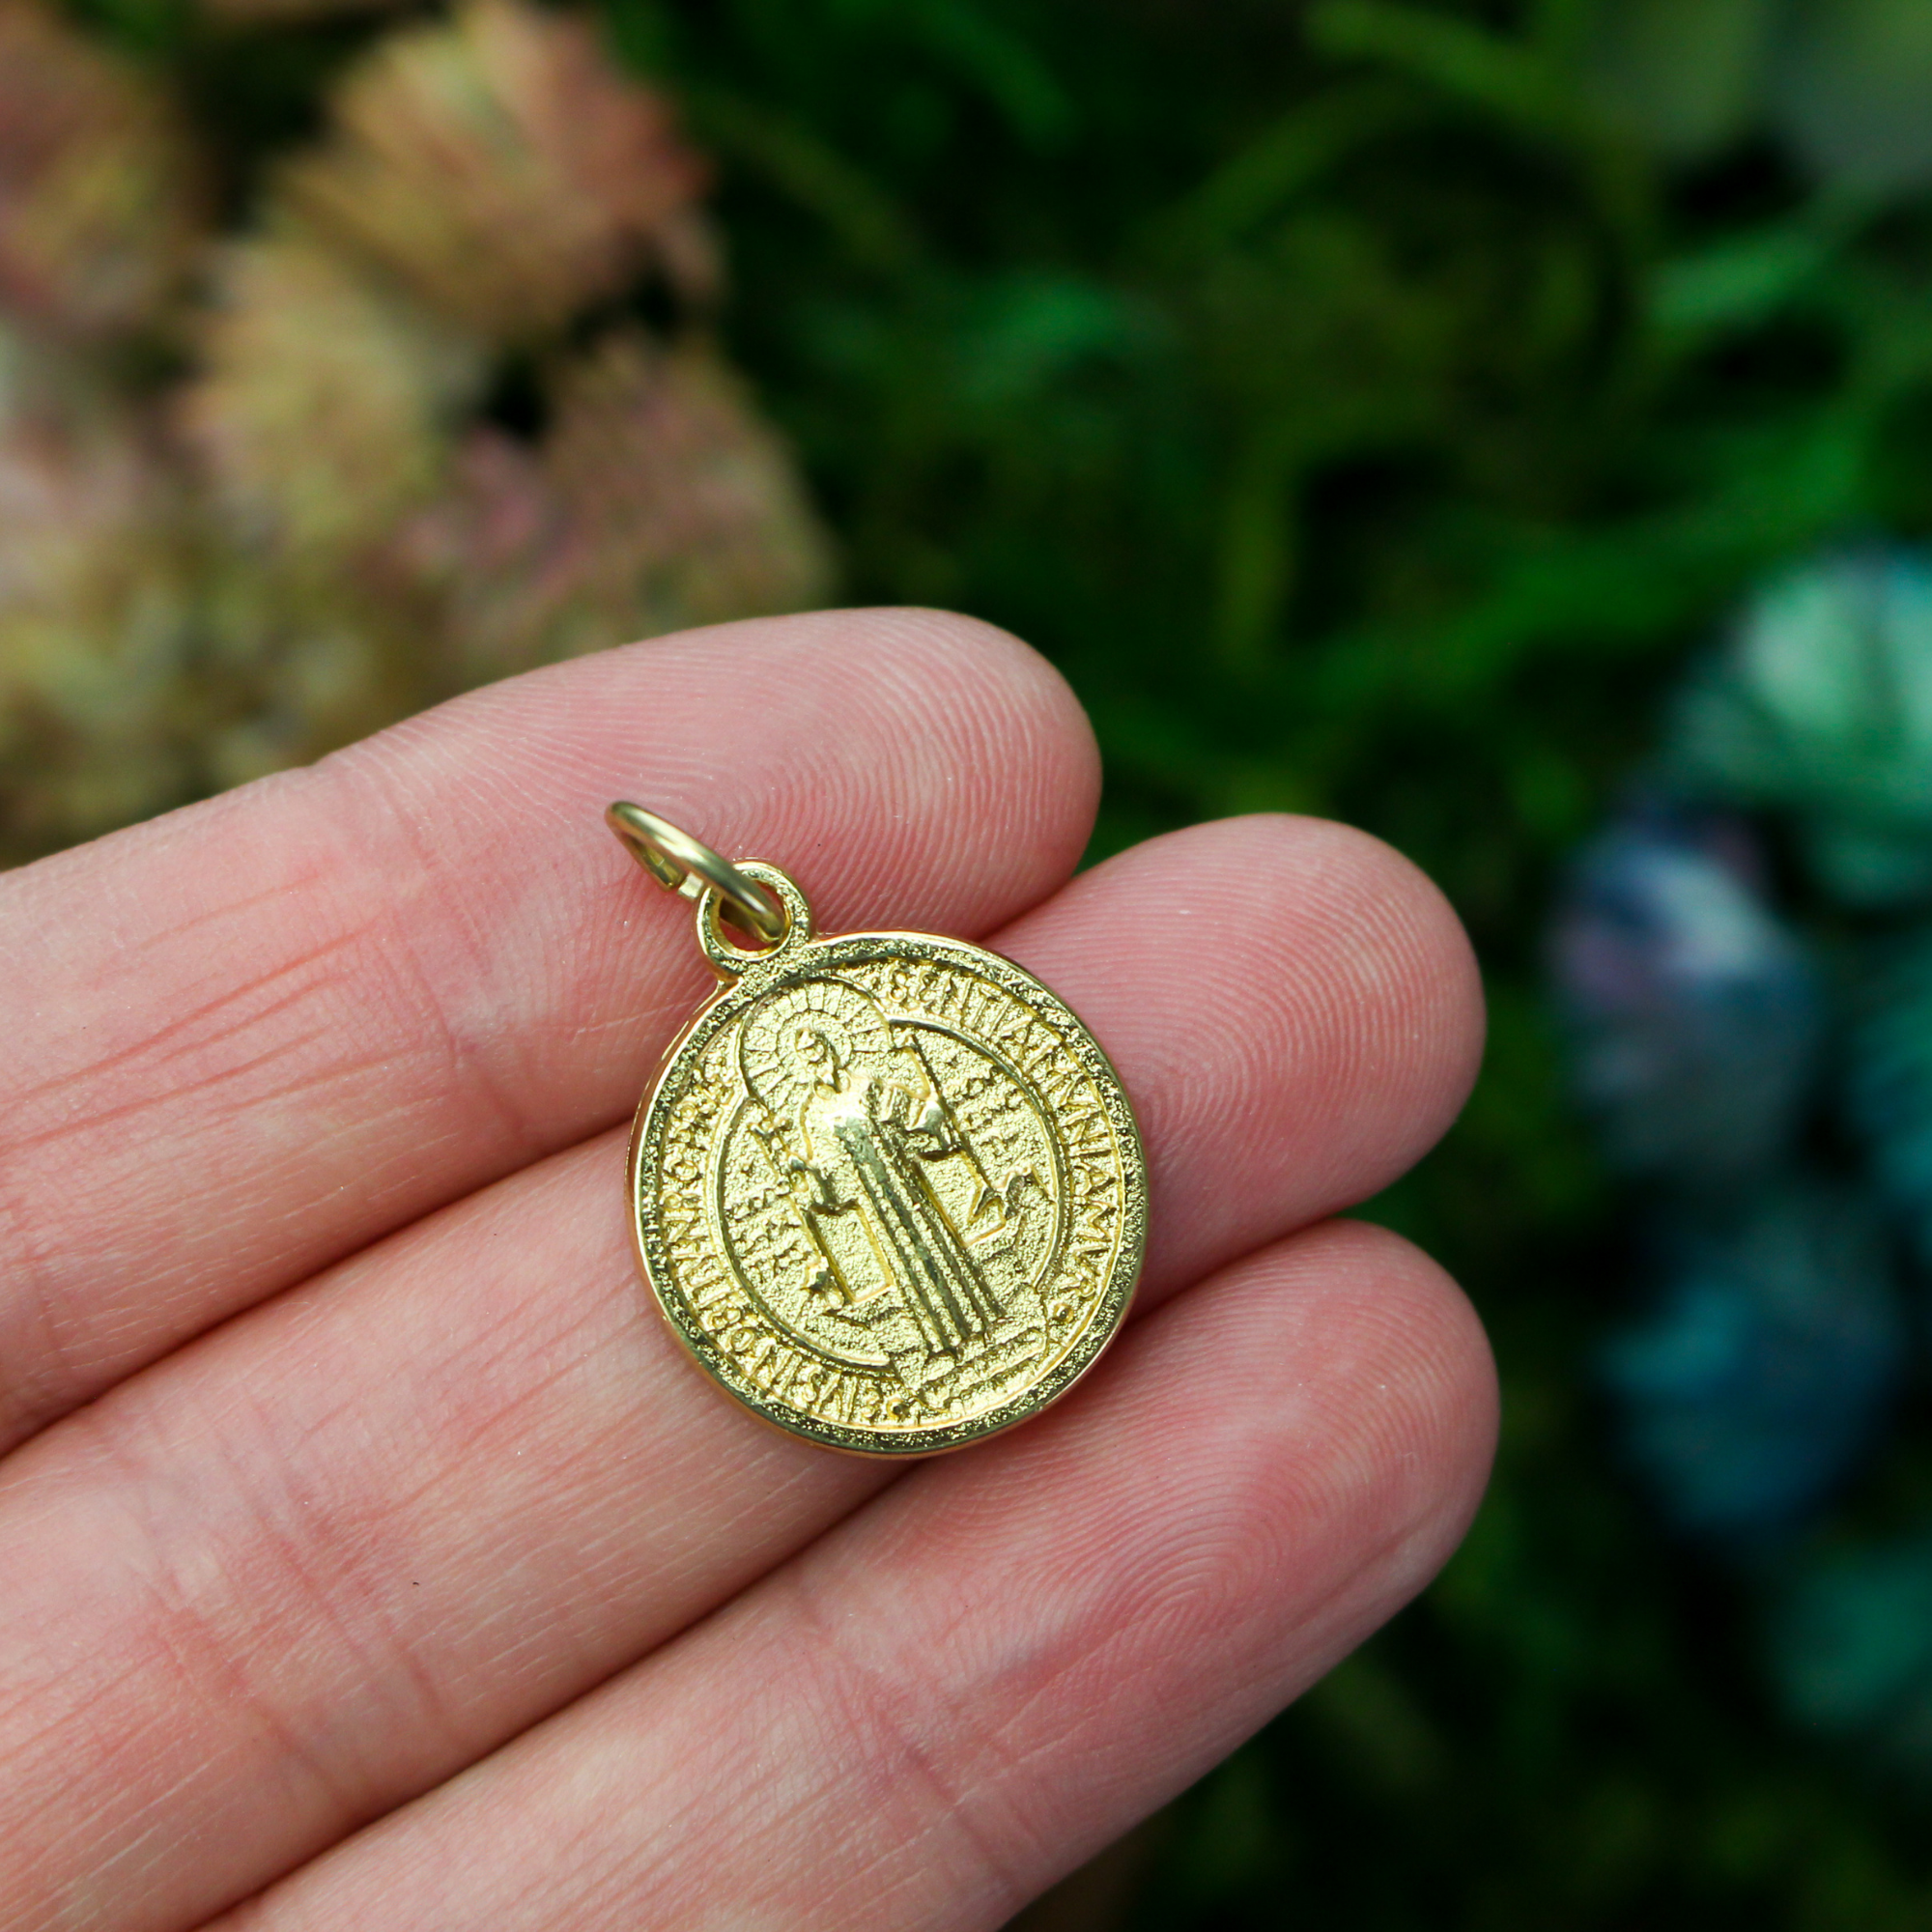 Saint Benedict protection medal that is gold-tone in color 17mm